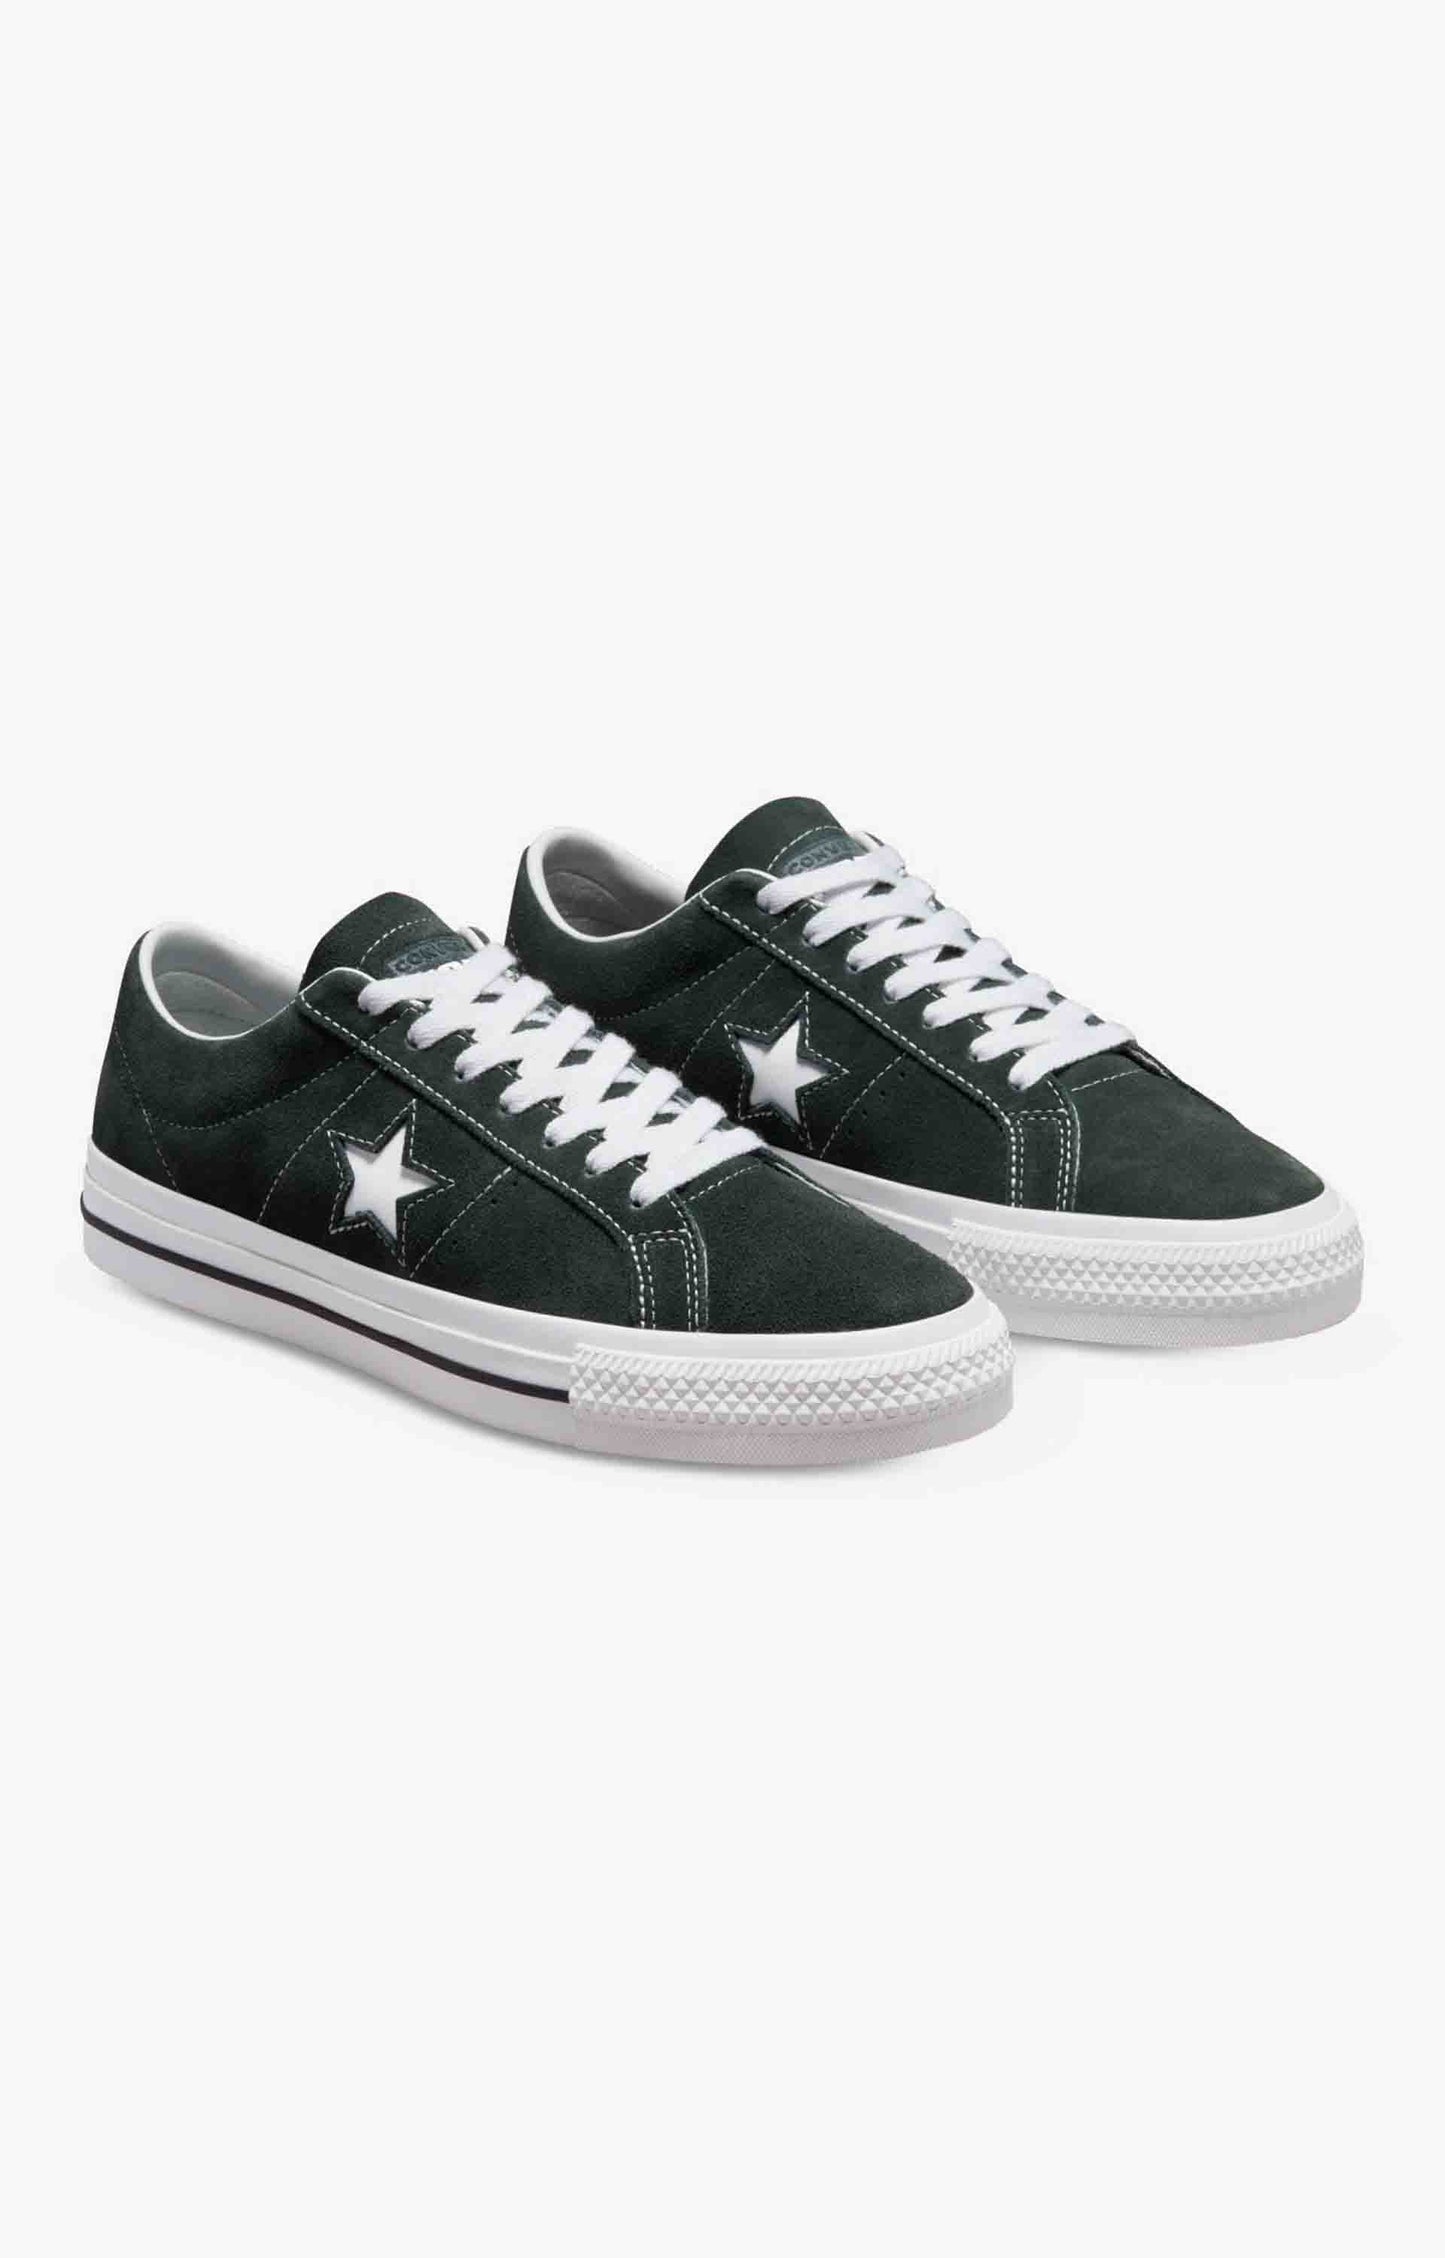 Converse One Star Pro Suede Low Mens Shoe, Seaweed